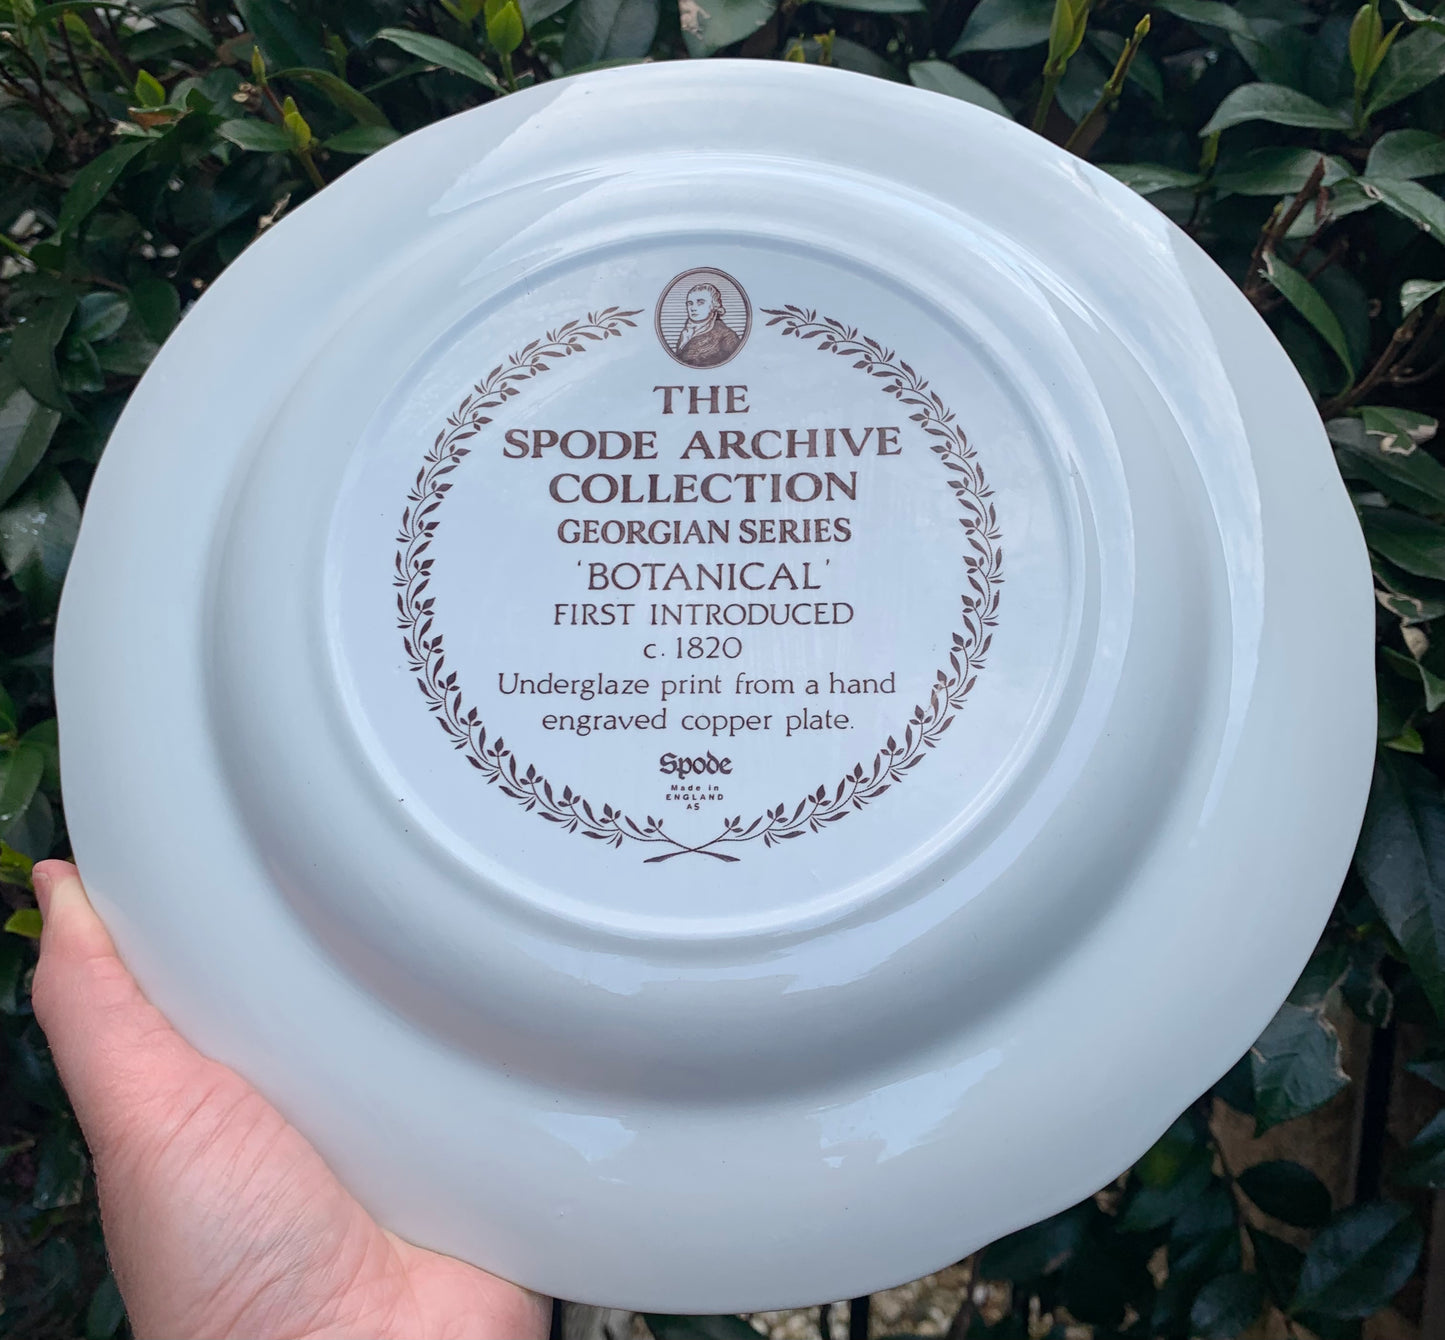 Spode Archive Collection Georgian Series Botanical Brown Transfer-ware Plate! - Excellent condition!